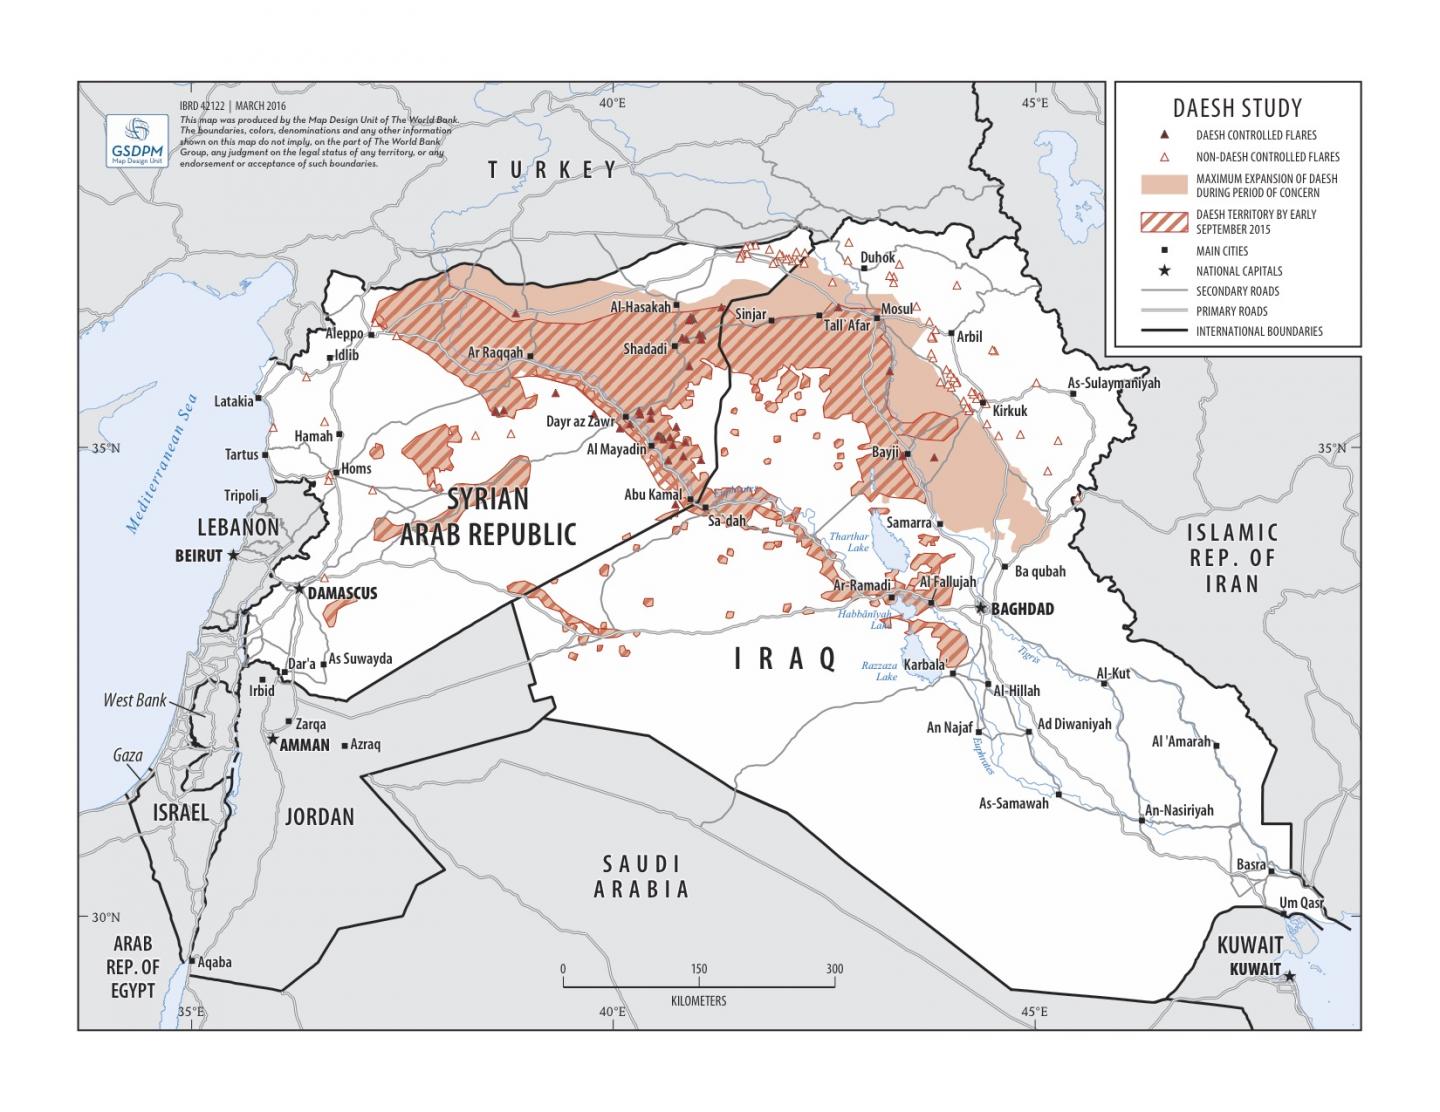 ISIS-Controlled Oil Production Sites, 2014-16